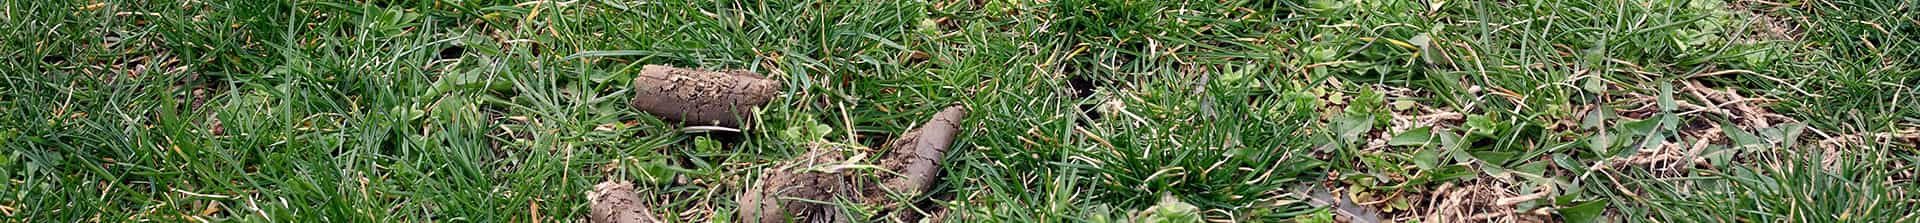 aeration cores on lawn